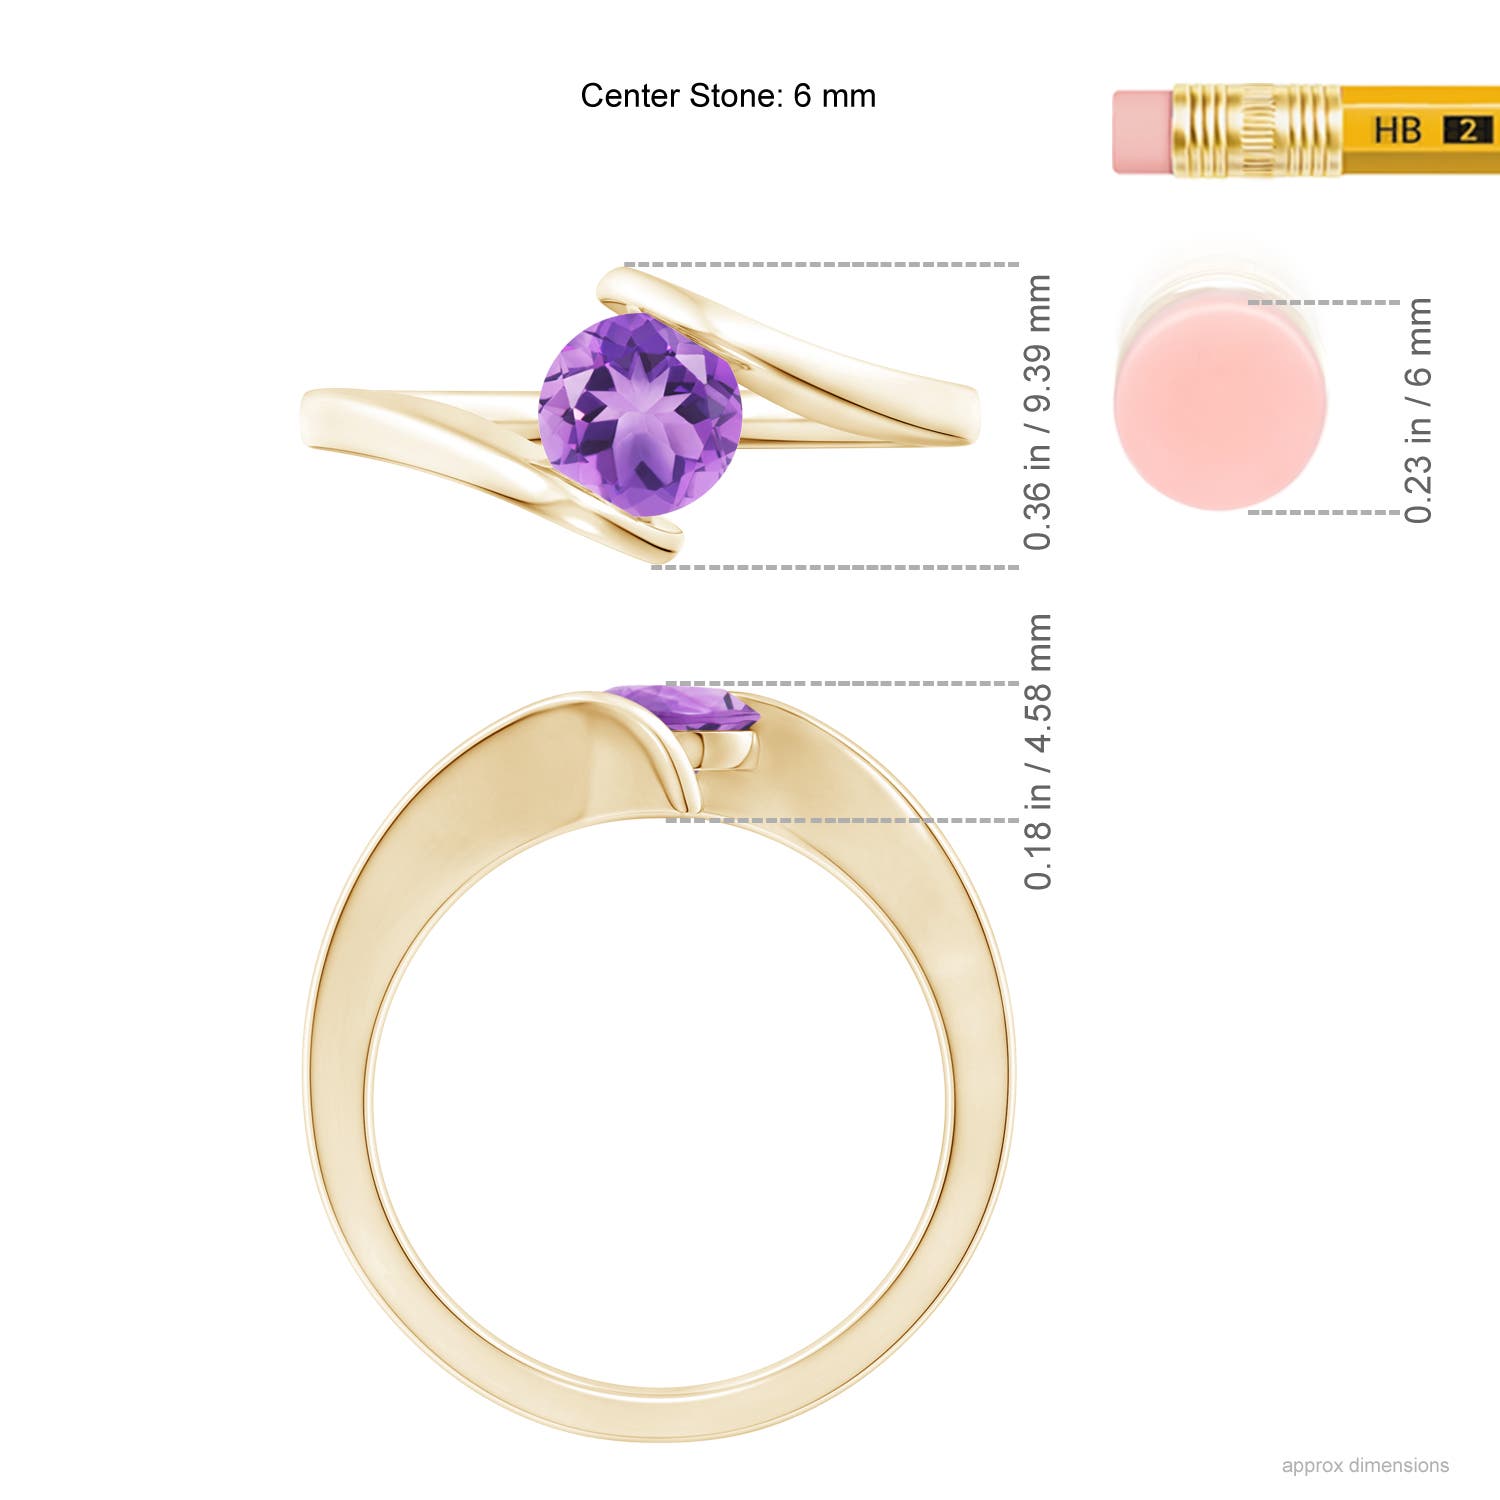 A - Amethyst / 0.8 CT / 14 KT Yellow Gold